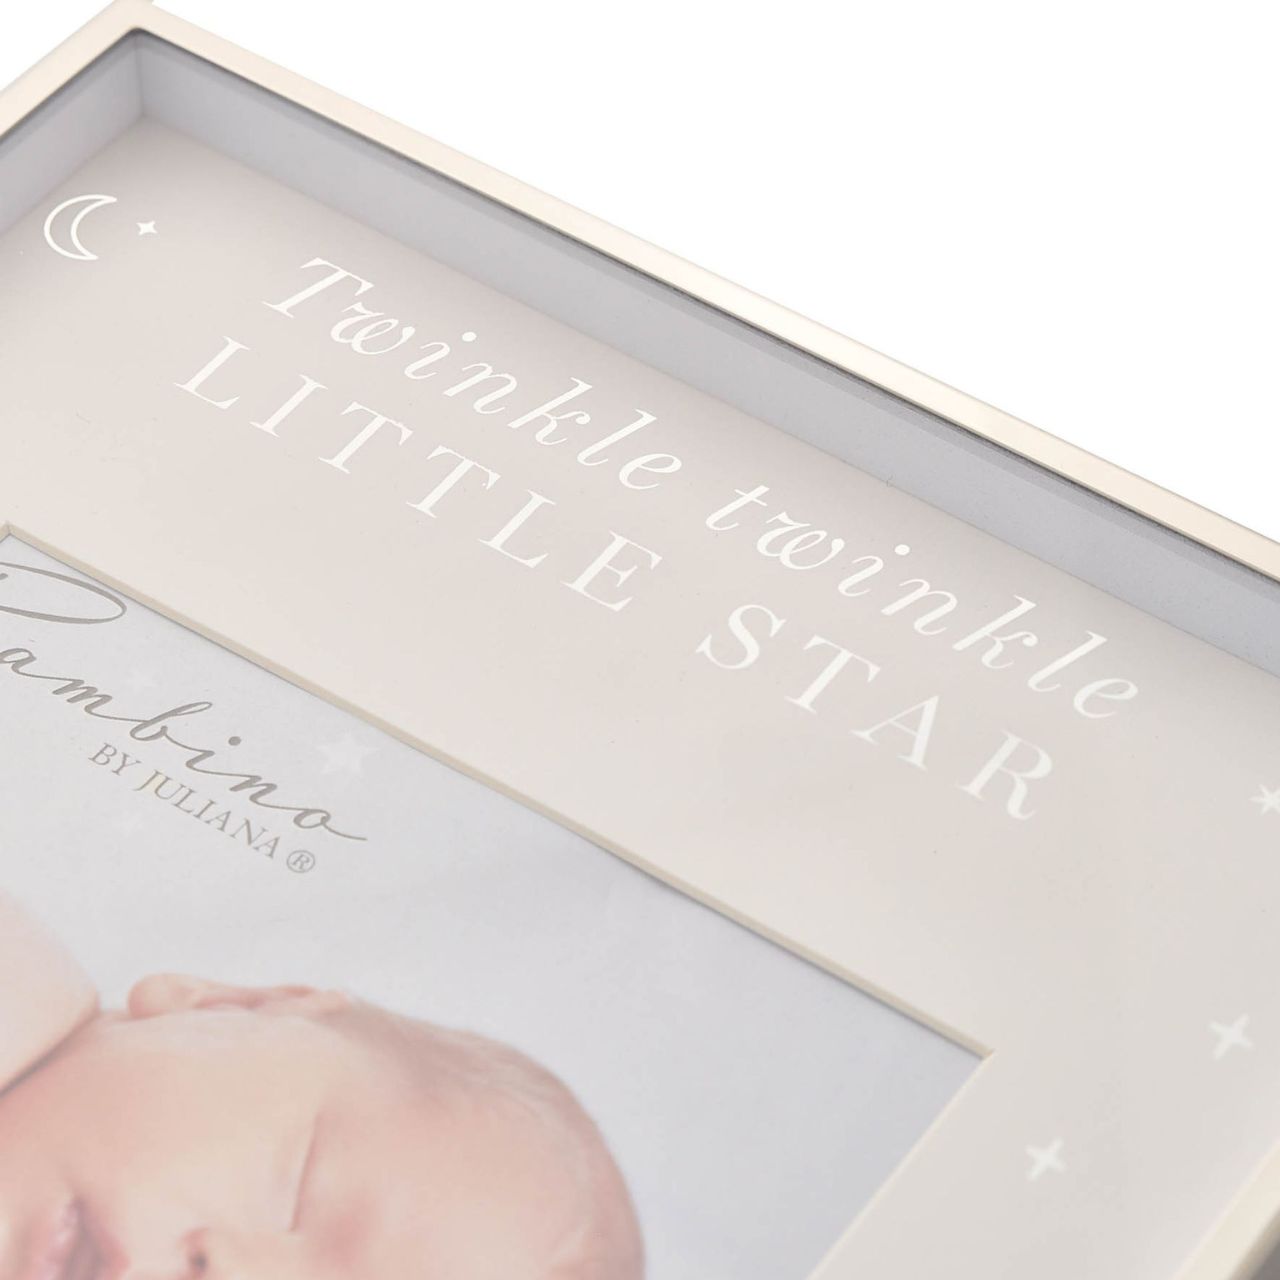 Bambino Plated Twinkle Twinkle Photo Frame 5" x 5"  A steel photo frame from BAMBINO BY JULIANA.  This exquisite frame is an optimal way to beautifully present the photograph of new family arrivals.